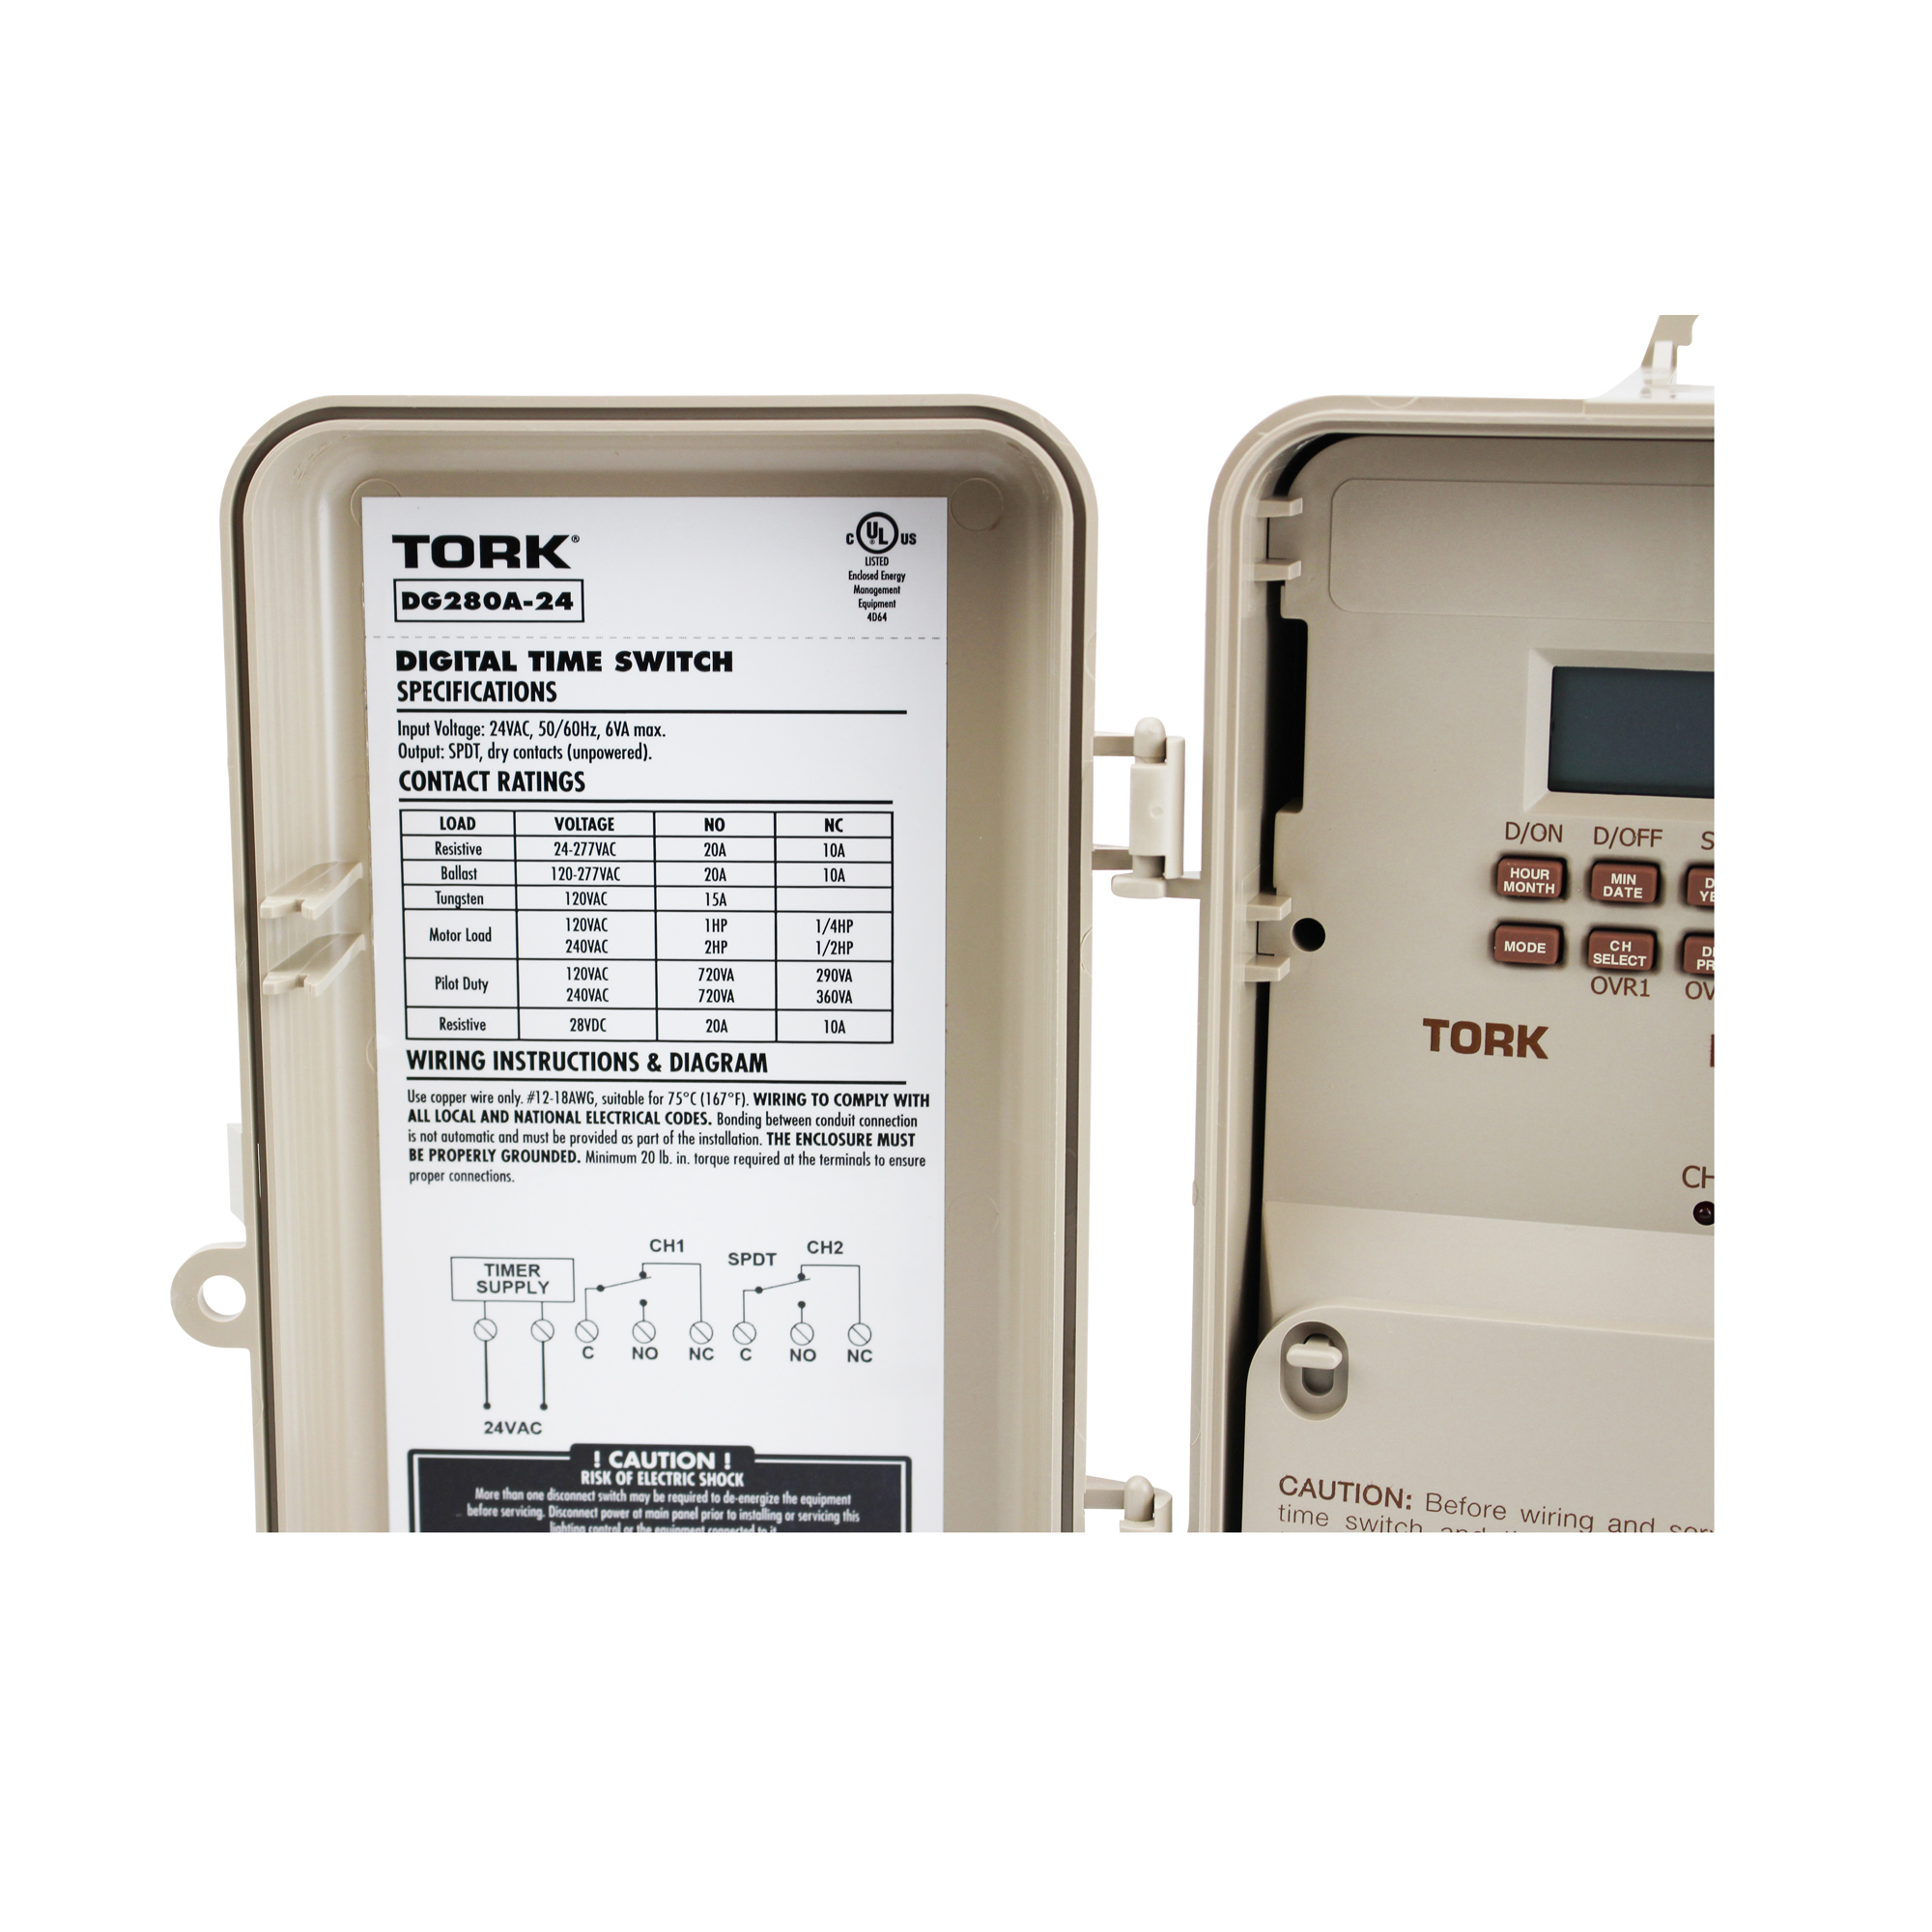 NSI Industries Tork DG280A-24 Signaling and Duty Cycle 24 Hour Time Switch with 2 Channel, 24 VAC 50/60 Hz Input Supply, SPDT Output Contact - image 2 of 4